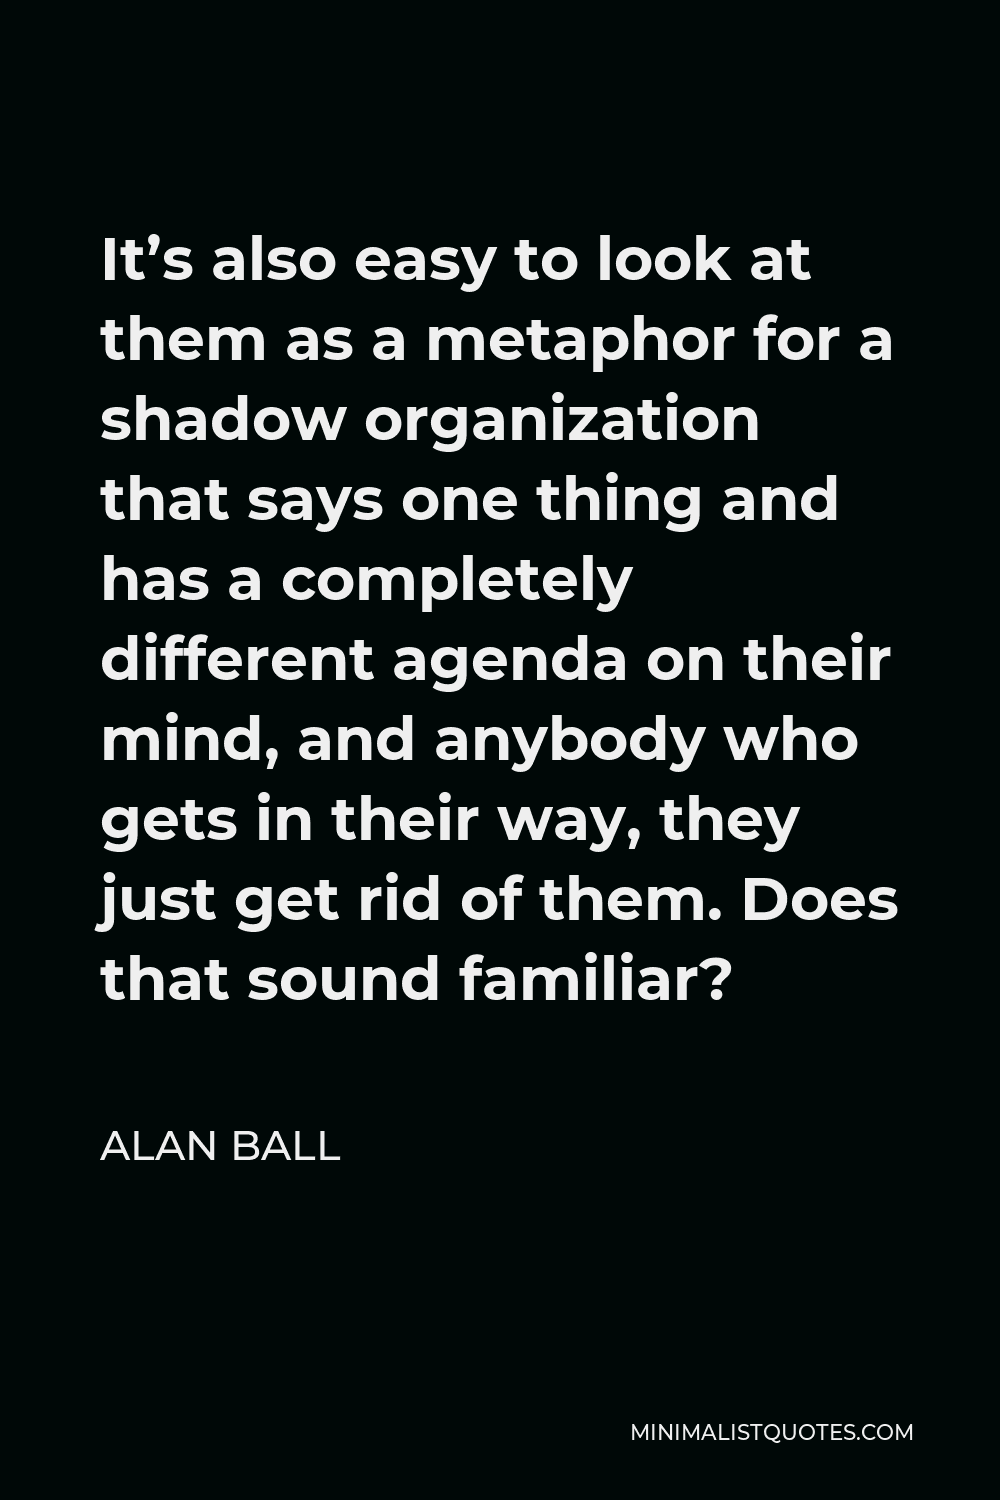 Alan Ball Quote - It’s also easy to look at them as a metaphor for a shadow organization that says one thing and has a completely different agenda on their mind, and anybody who gets in their way, they just get rid of them. Does that sound familiar?